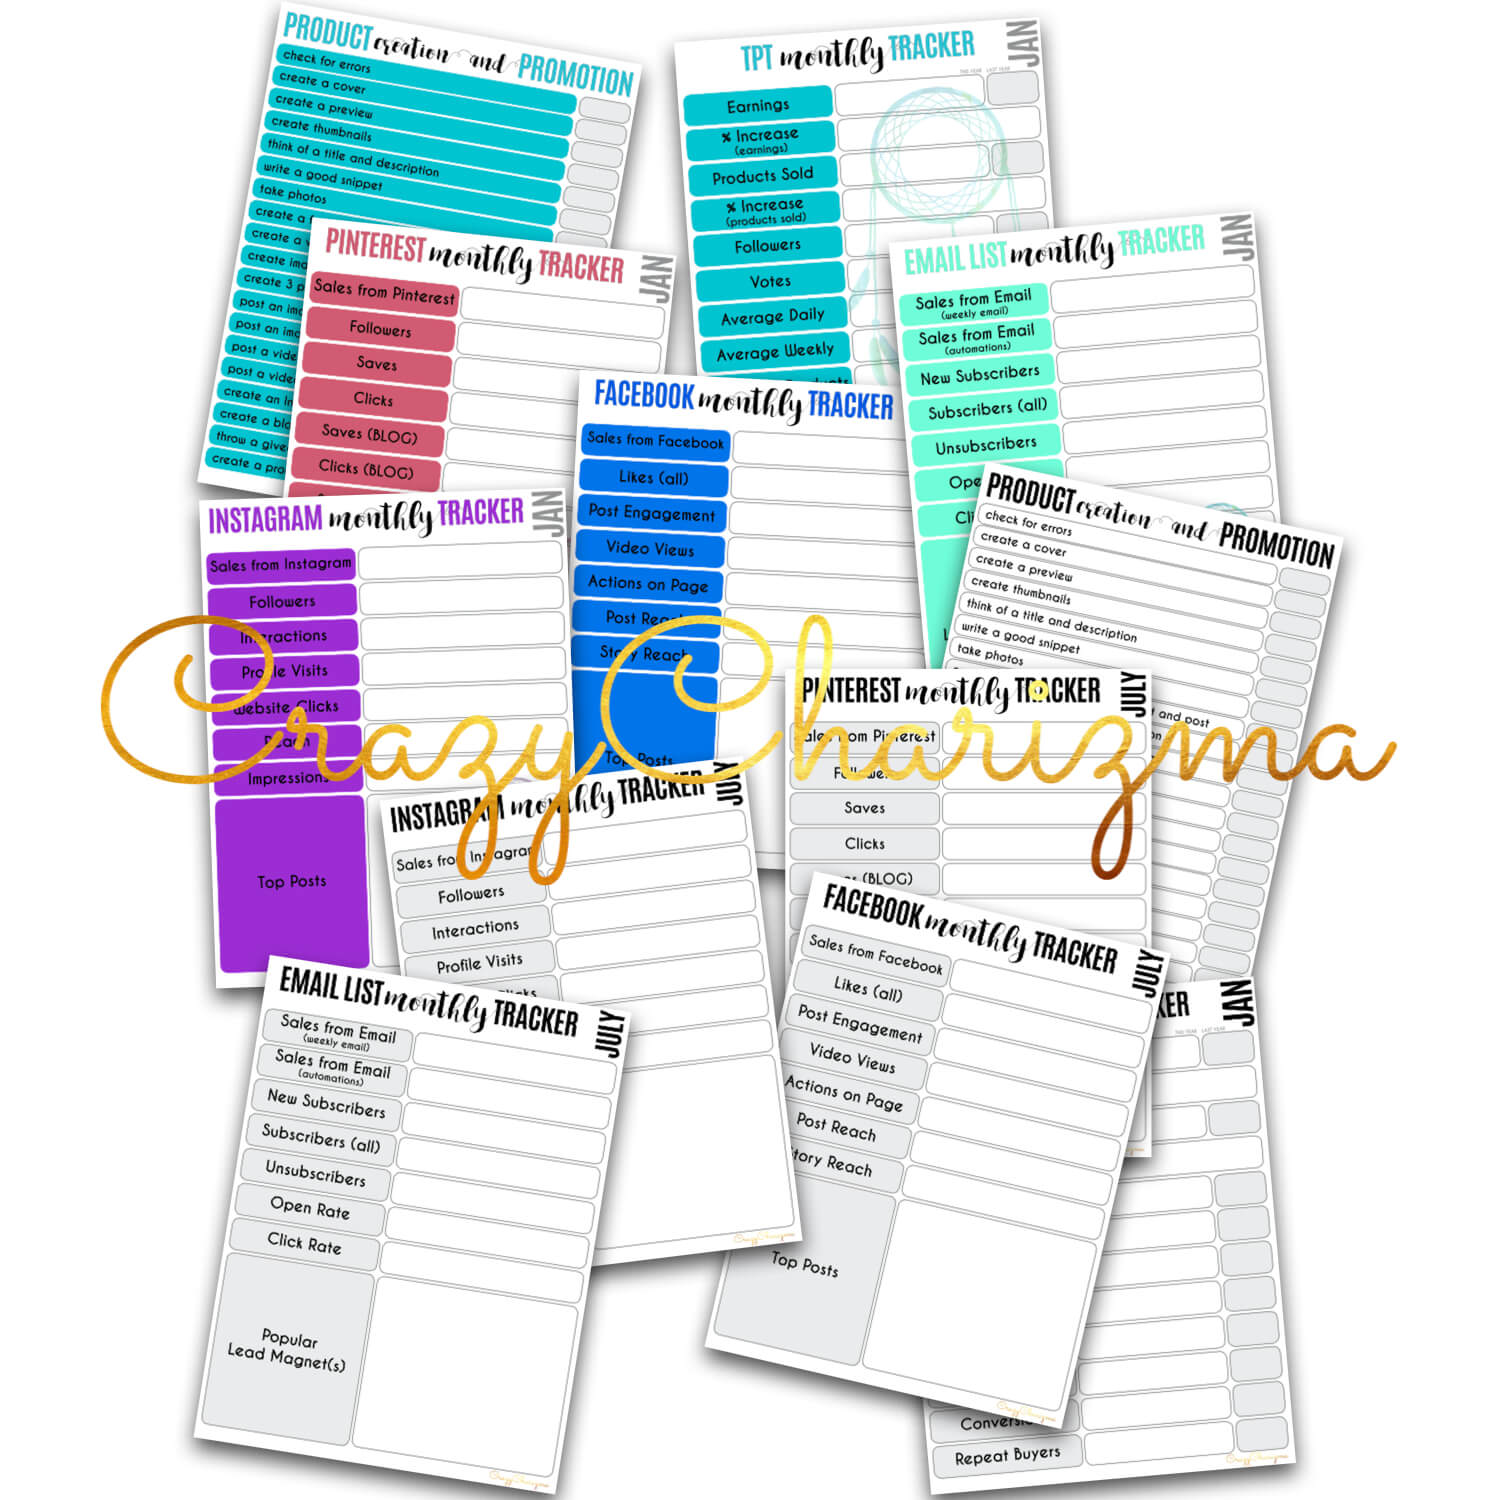 If you take TPT seriously, you definitely track your business growth and stats. This TPT planner and seller binder will help you set your goals, plan your product creation, get the product creation list and marketing plan, track social media and email list stats. And so much more.